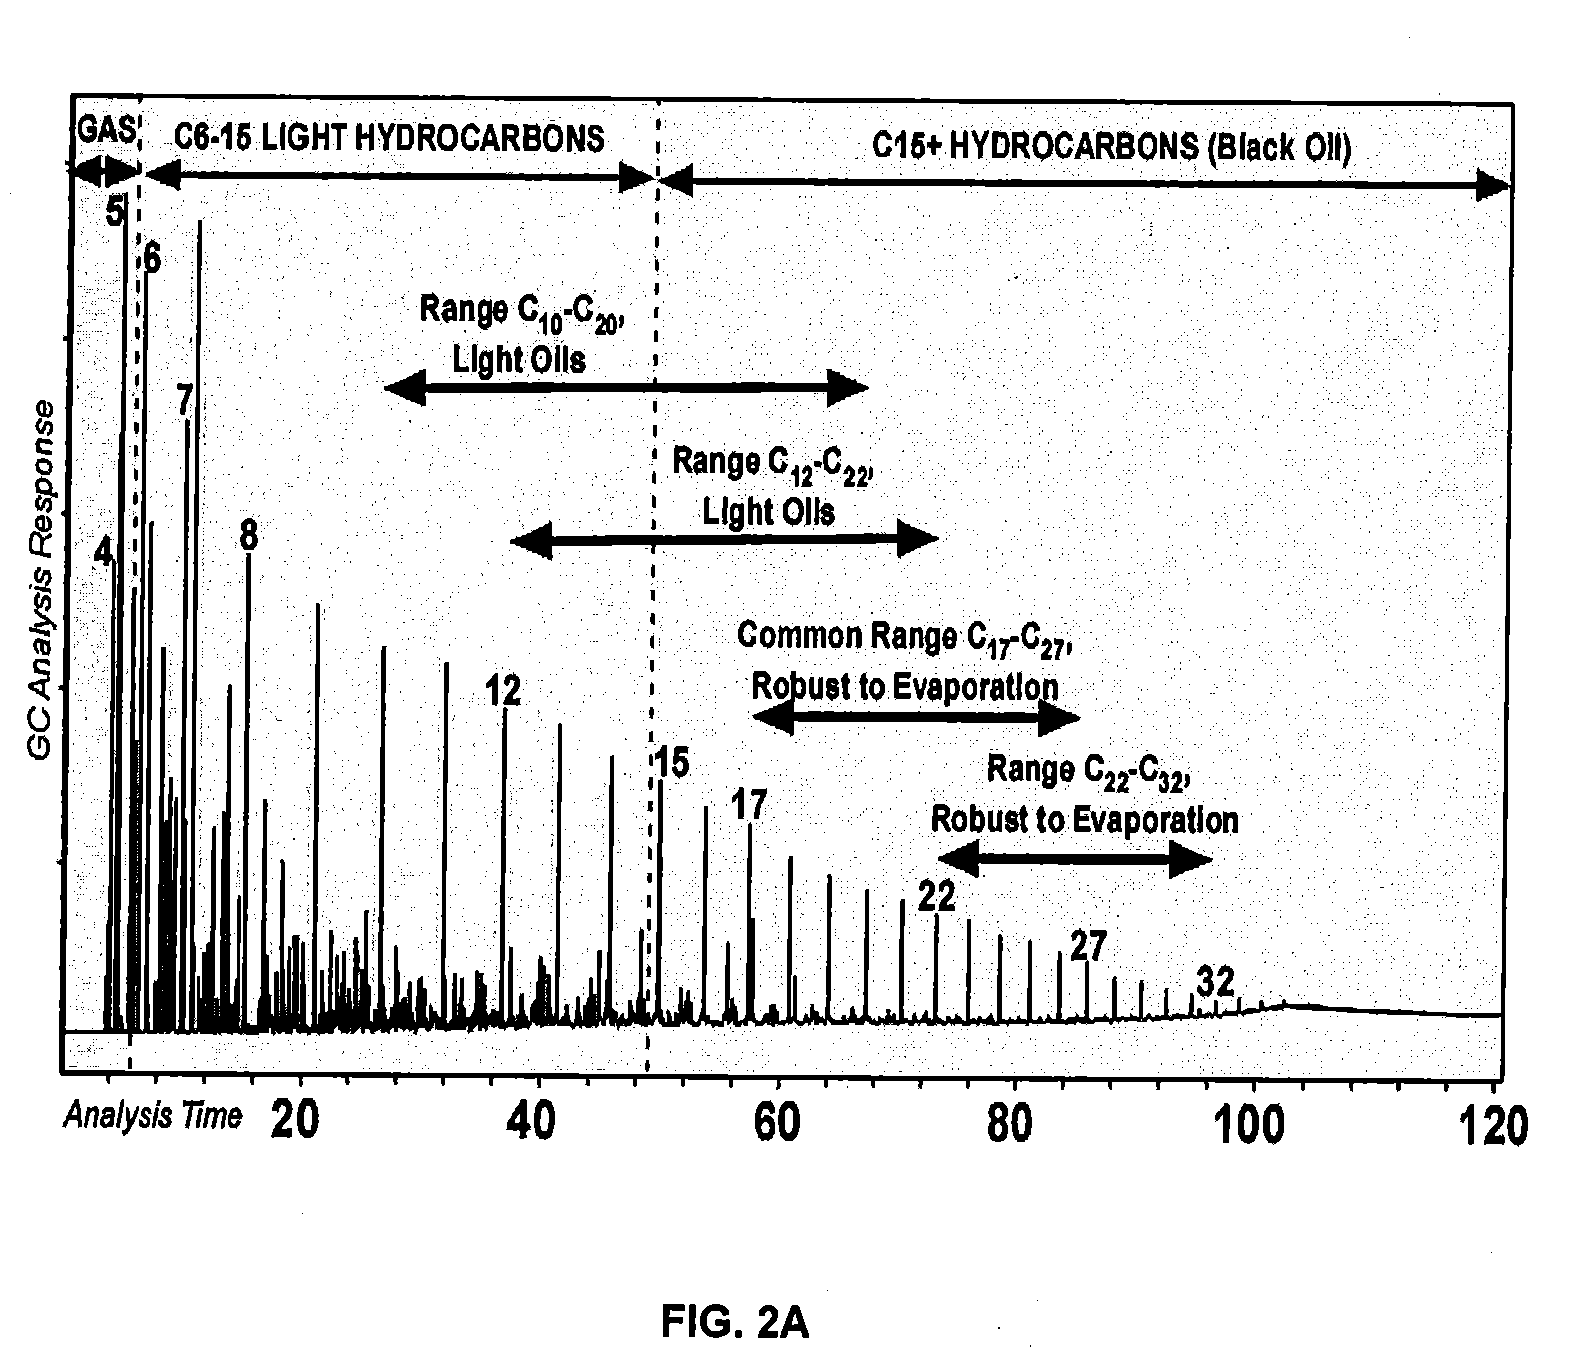 Petroleum-fluid property prediction from gas chromatographic analysis of rock extracts or fluid samples